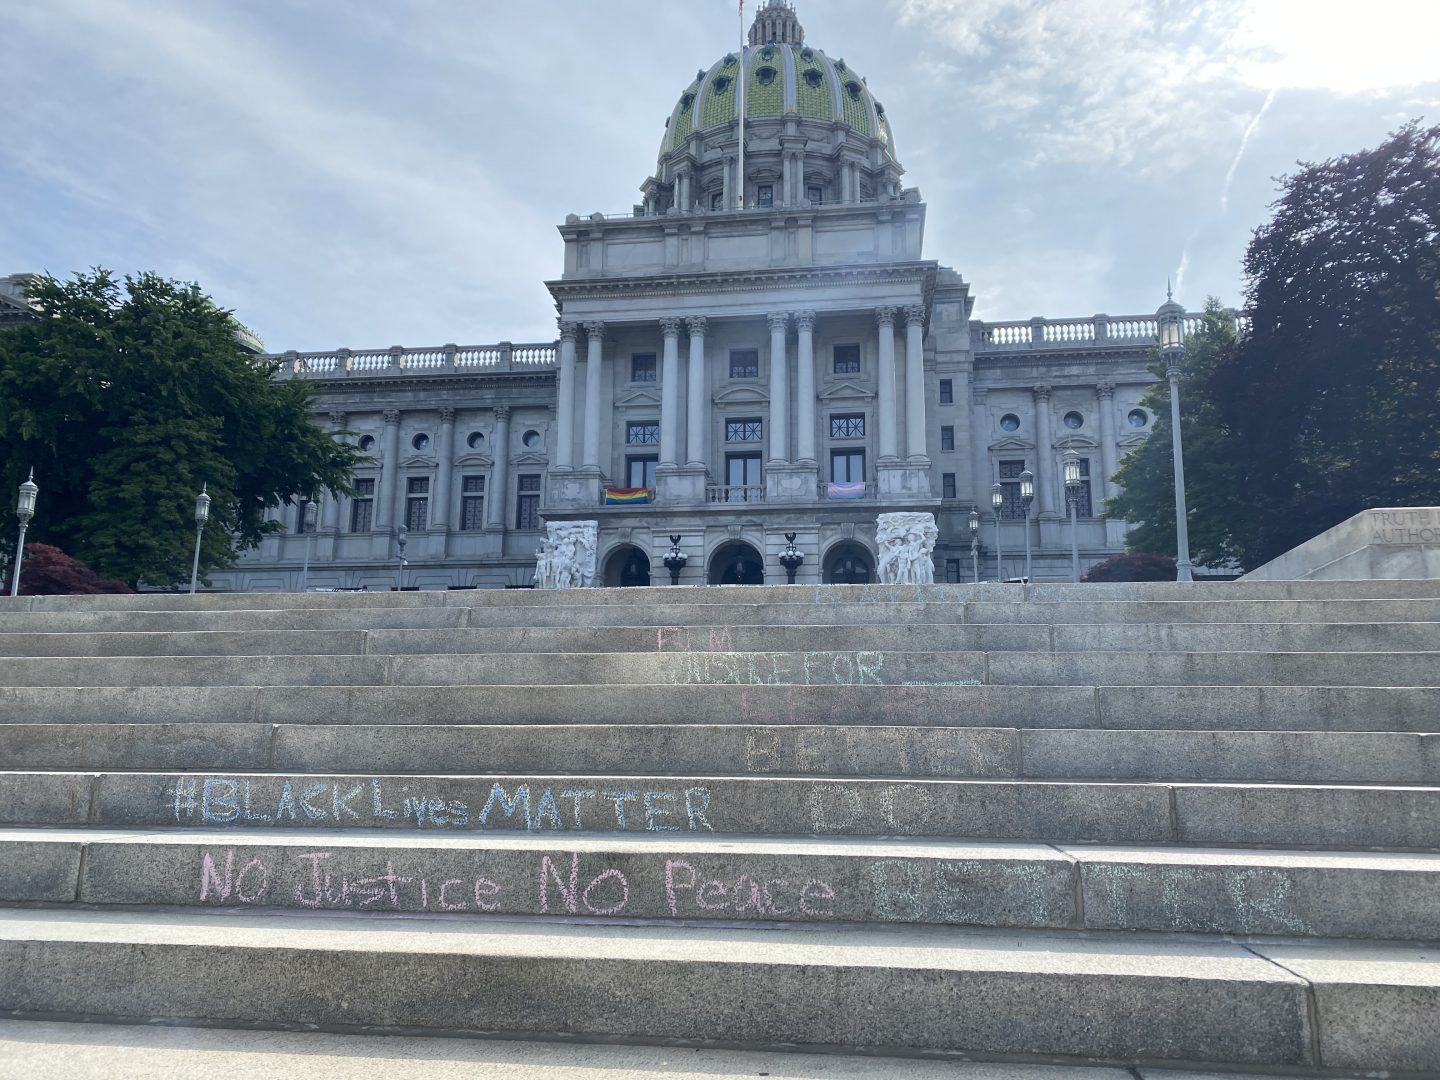 The steps outside the state Capitol on June 15, 2020.